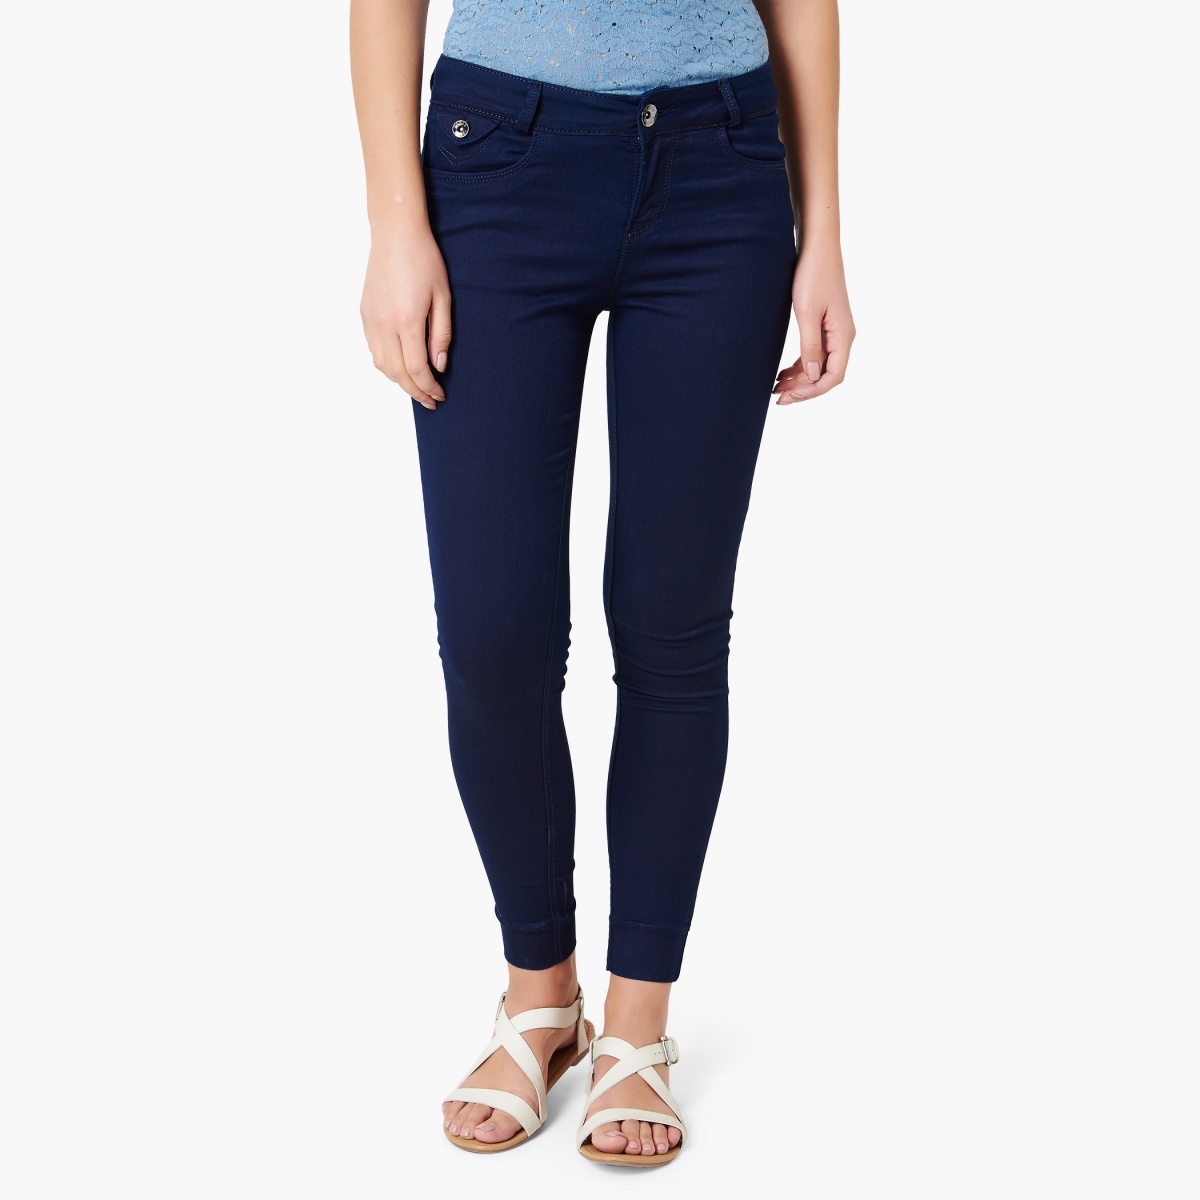 XPOSE Skinny Fit Jeans